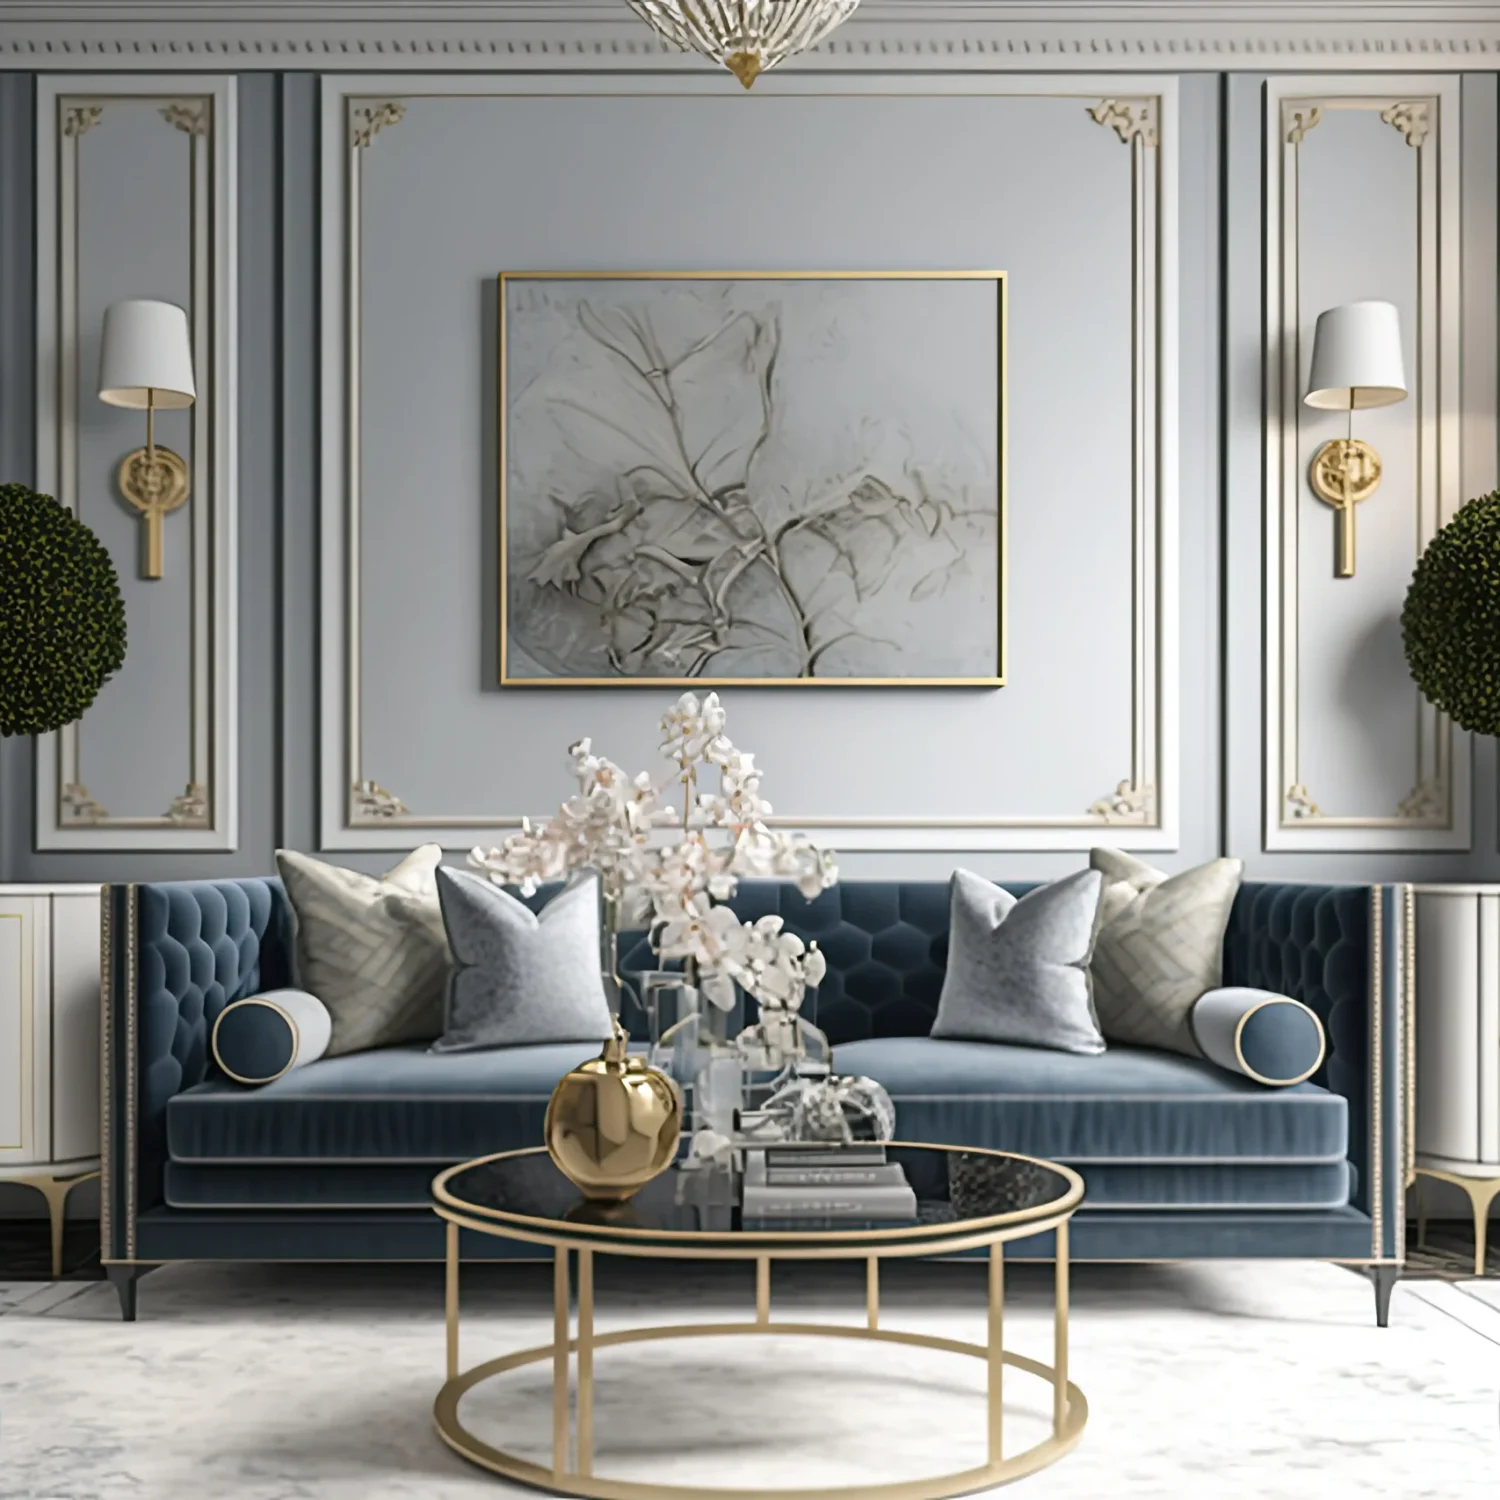 living-room-with-blue-sofa-gold-coffee-table